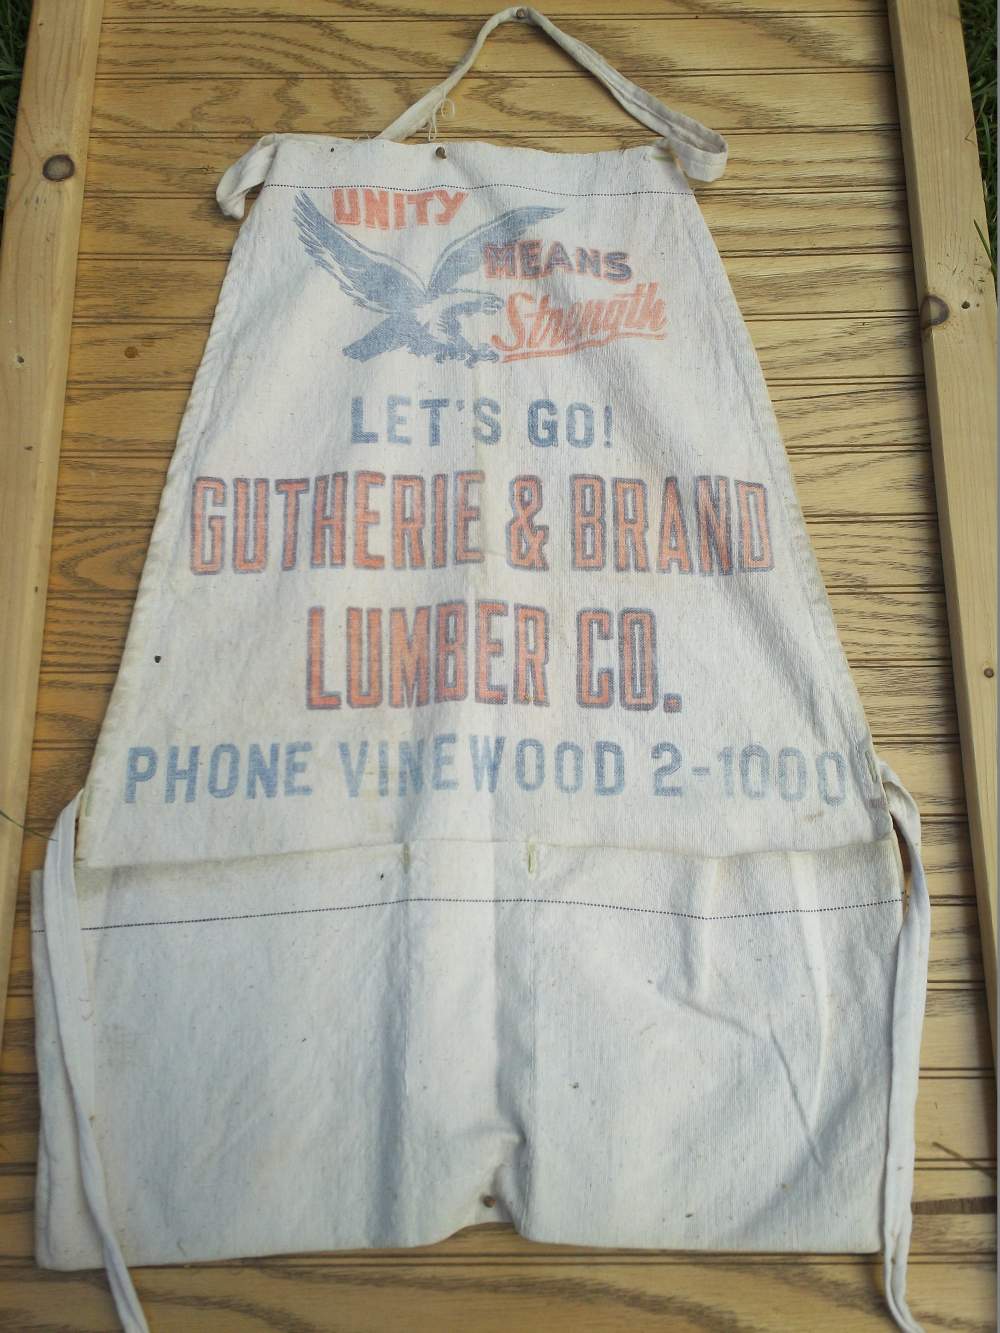 Name:  GLC Gutherie and Brand Lumber.jpg
Views: 902
Size:  142.7 KB